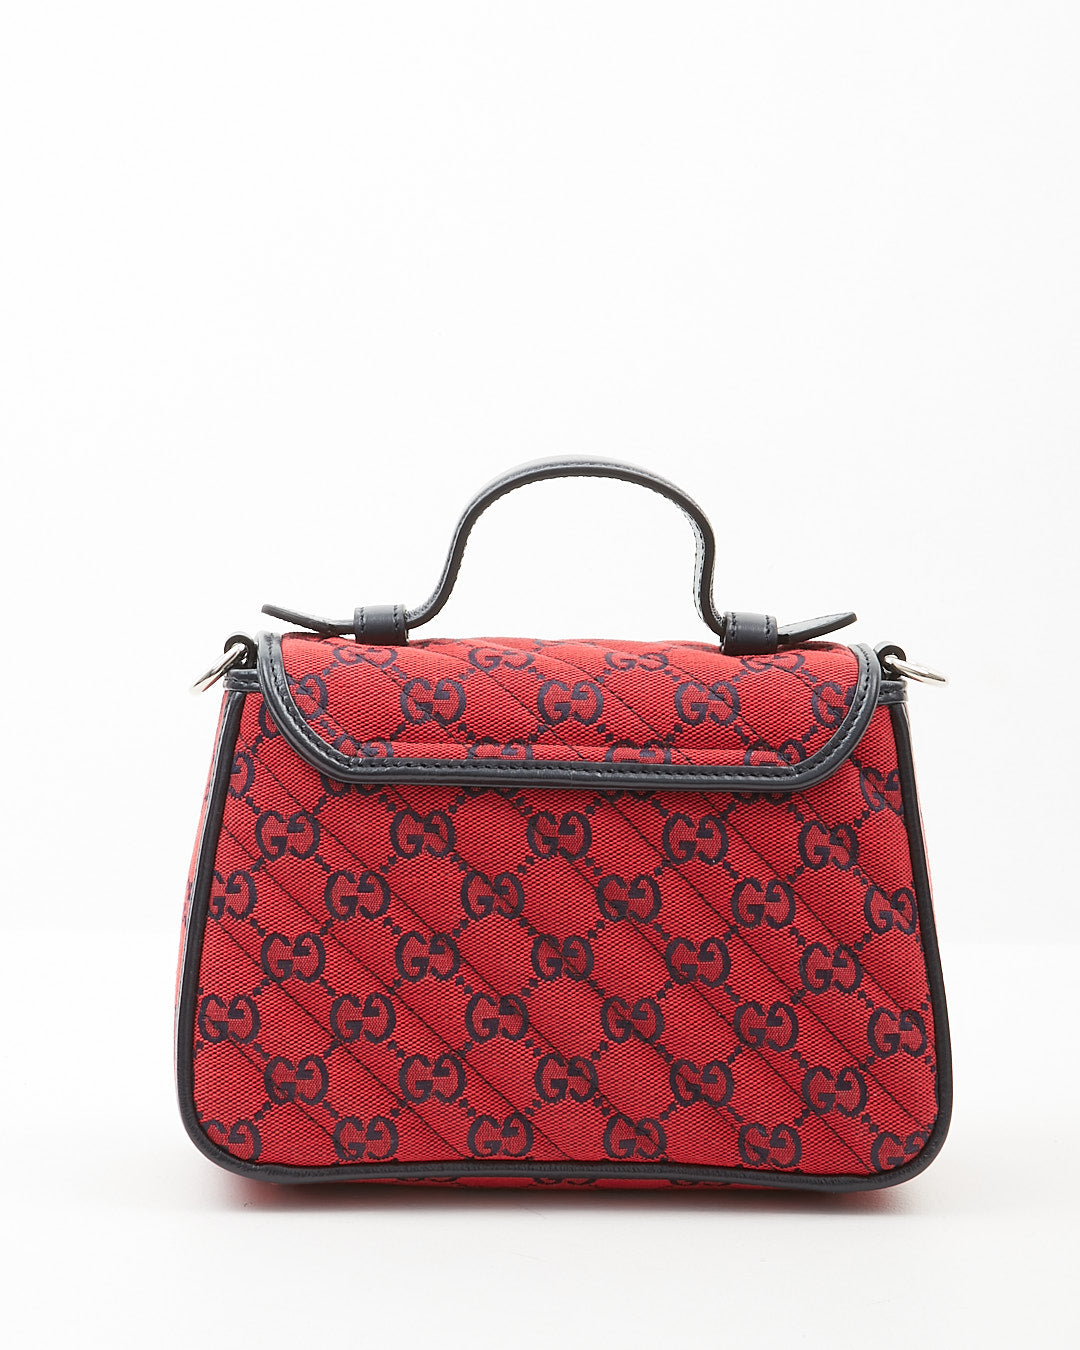 Gucci LIMITED EDITION Red and Black GG Monogram Marmont Mini Satchel